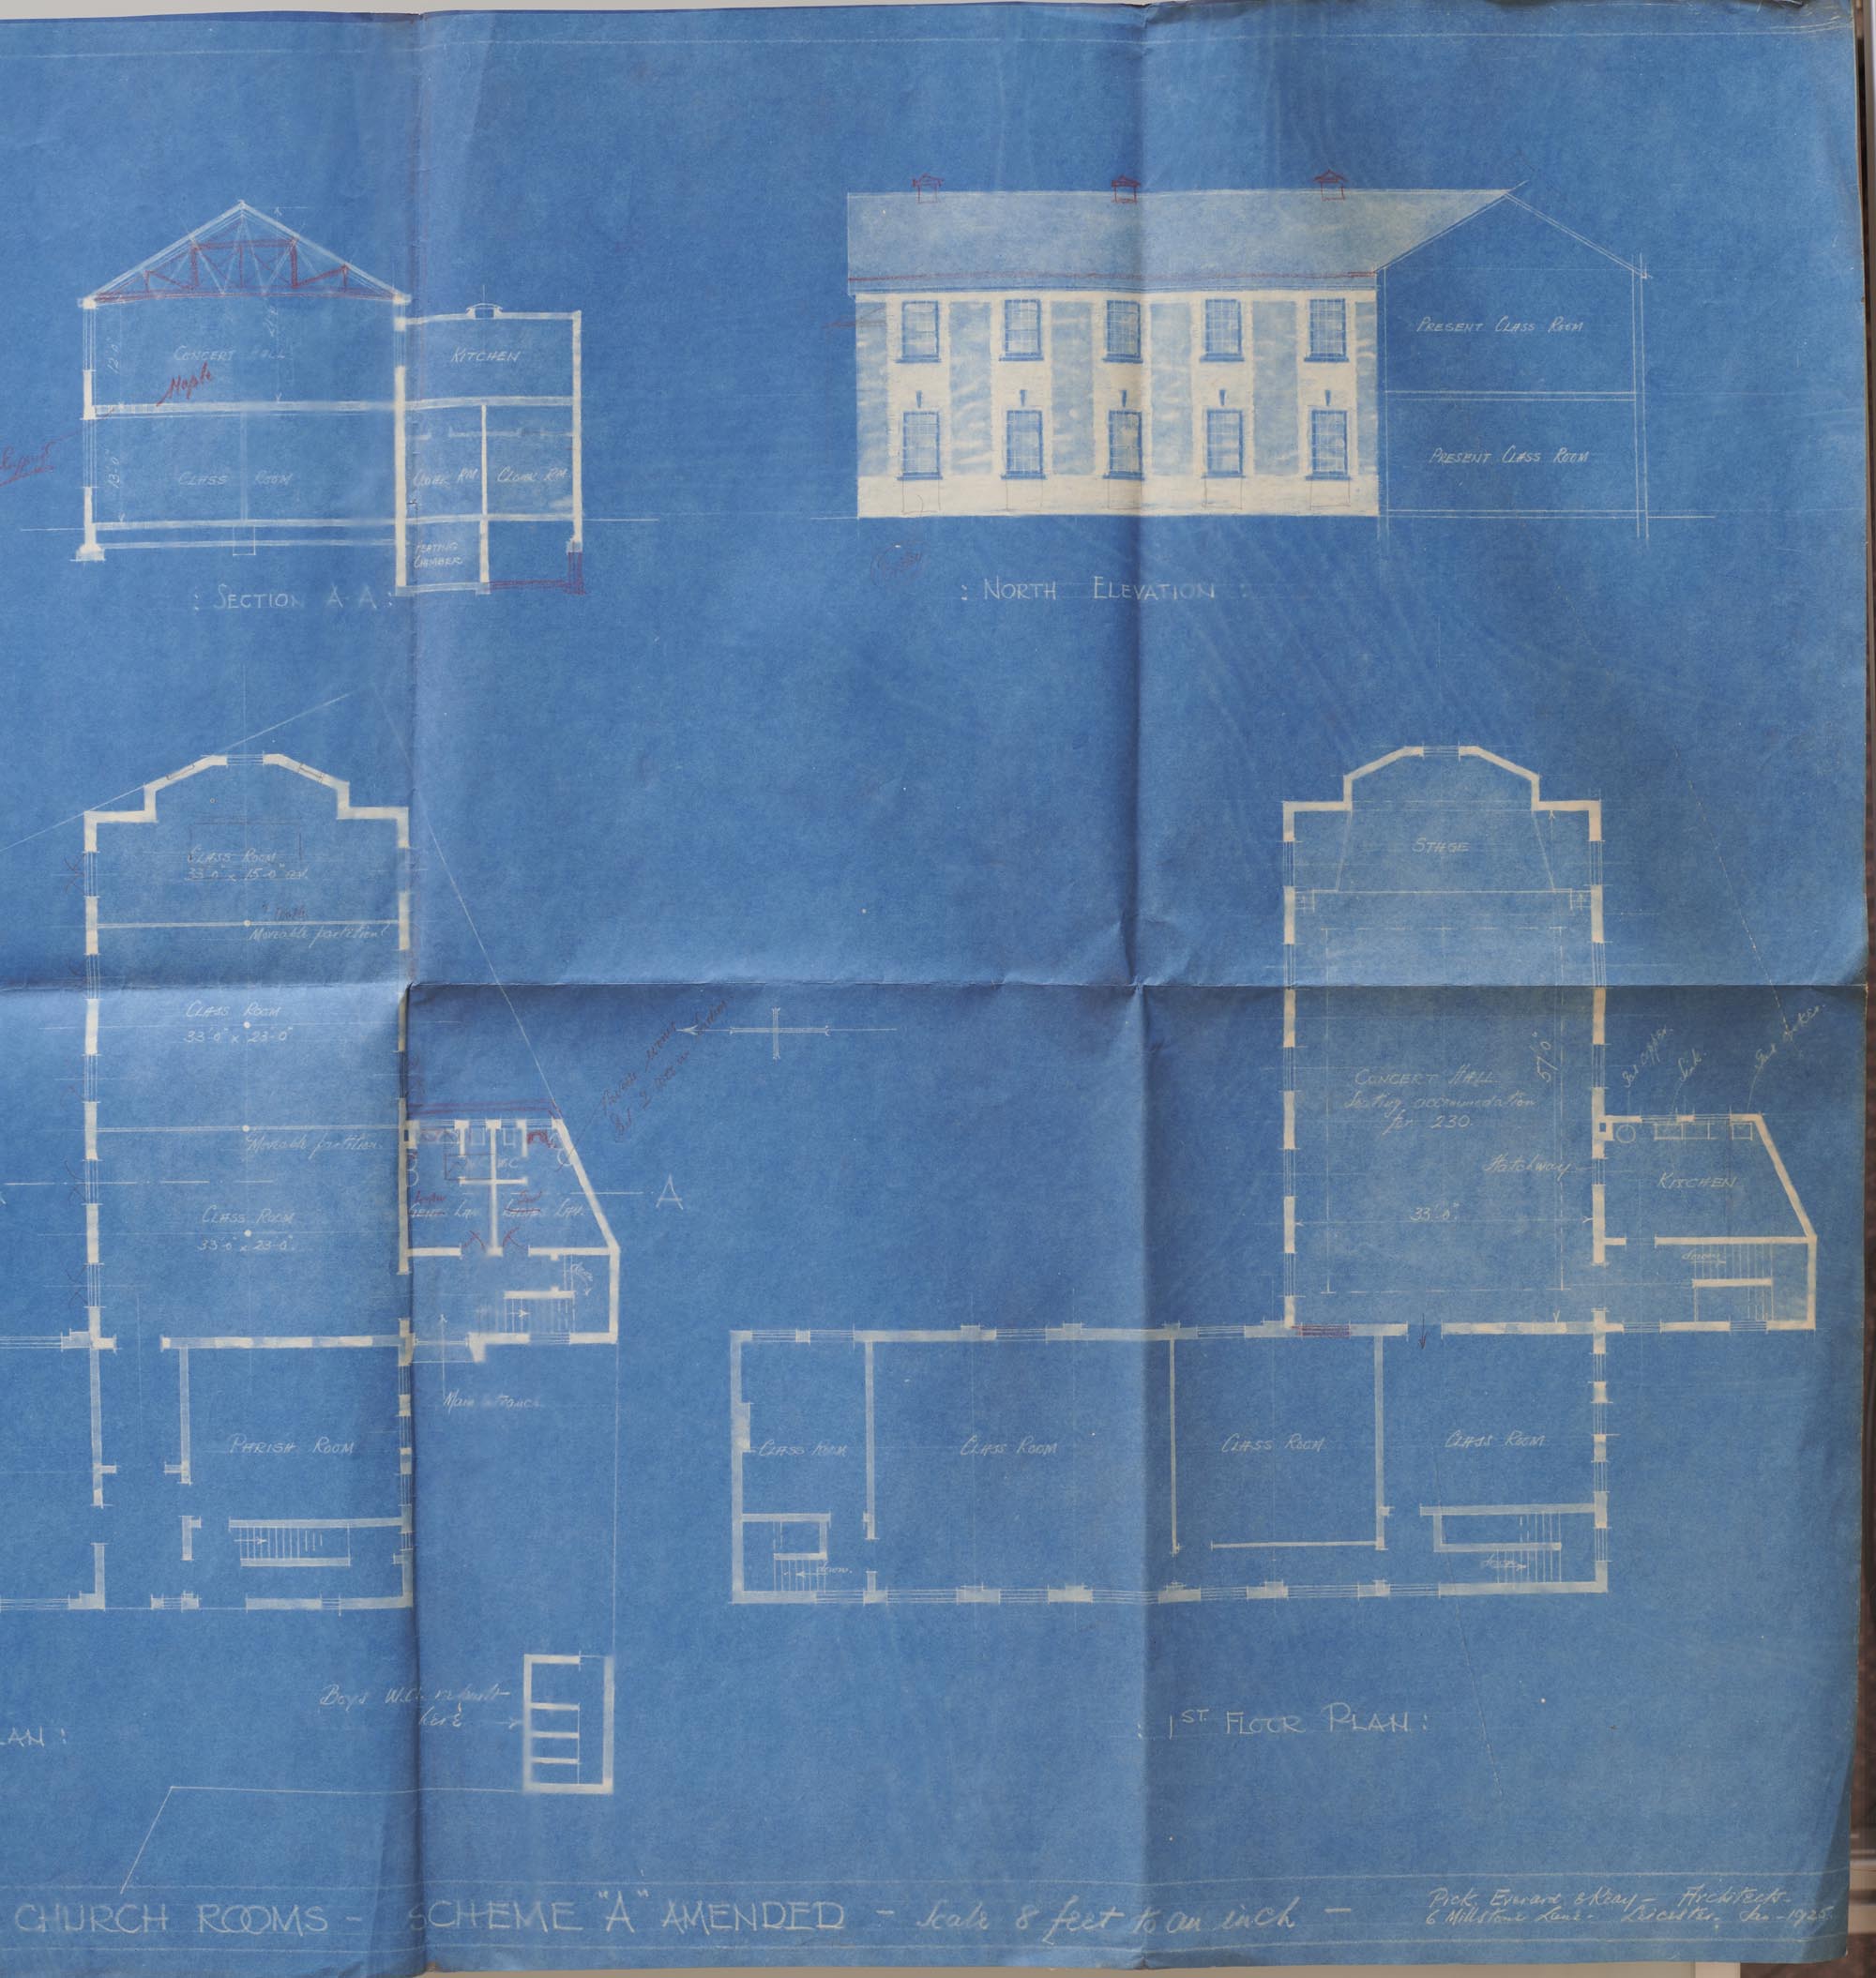 Plans of Church - credit - Record Office for Leicestershire, Leicester and Rutland